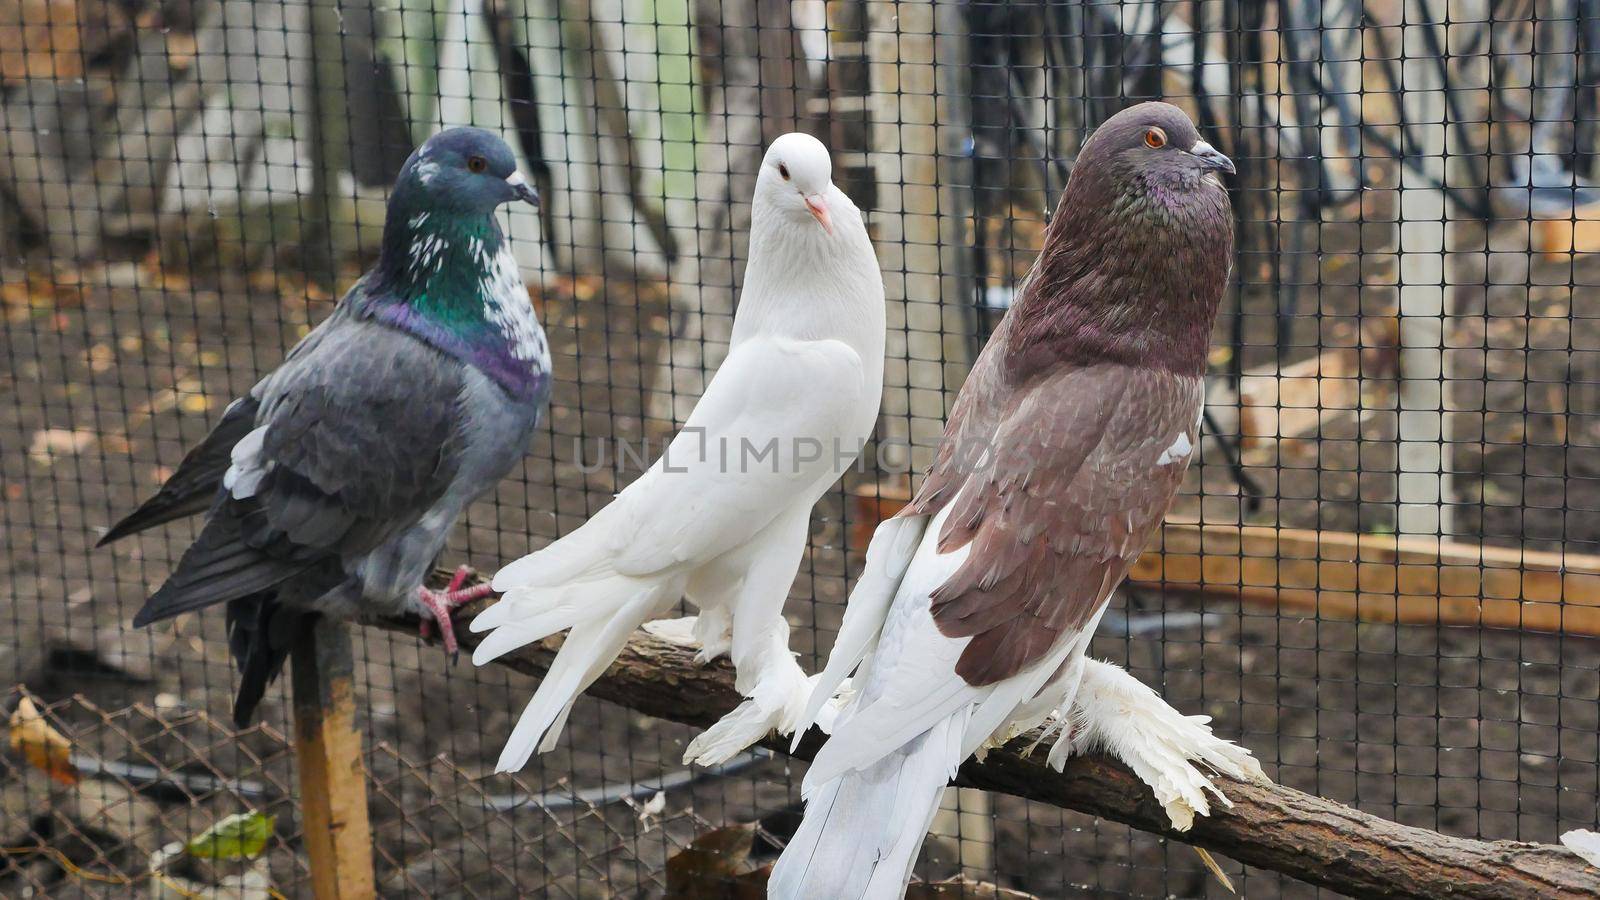 Decorative pigeons of different breeds colors with shaggy paws on a farm in a cage. Beautiful originals various types breed pigeons. Special plumage.